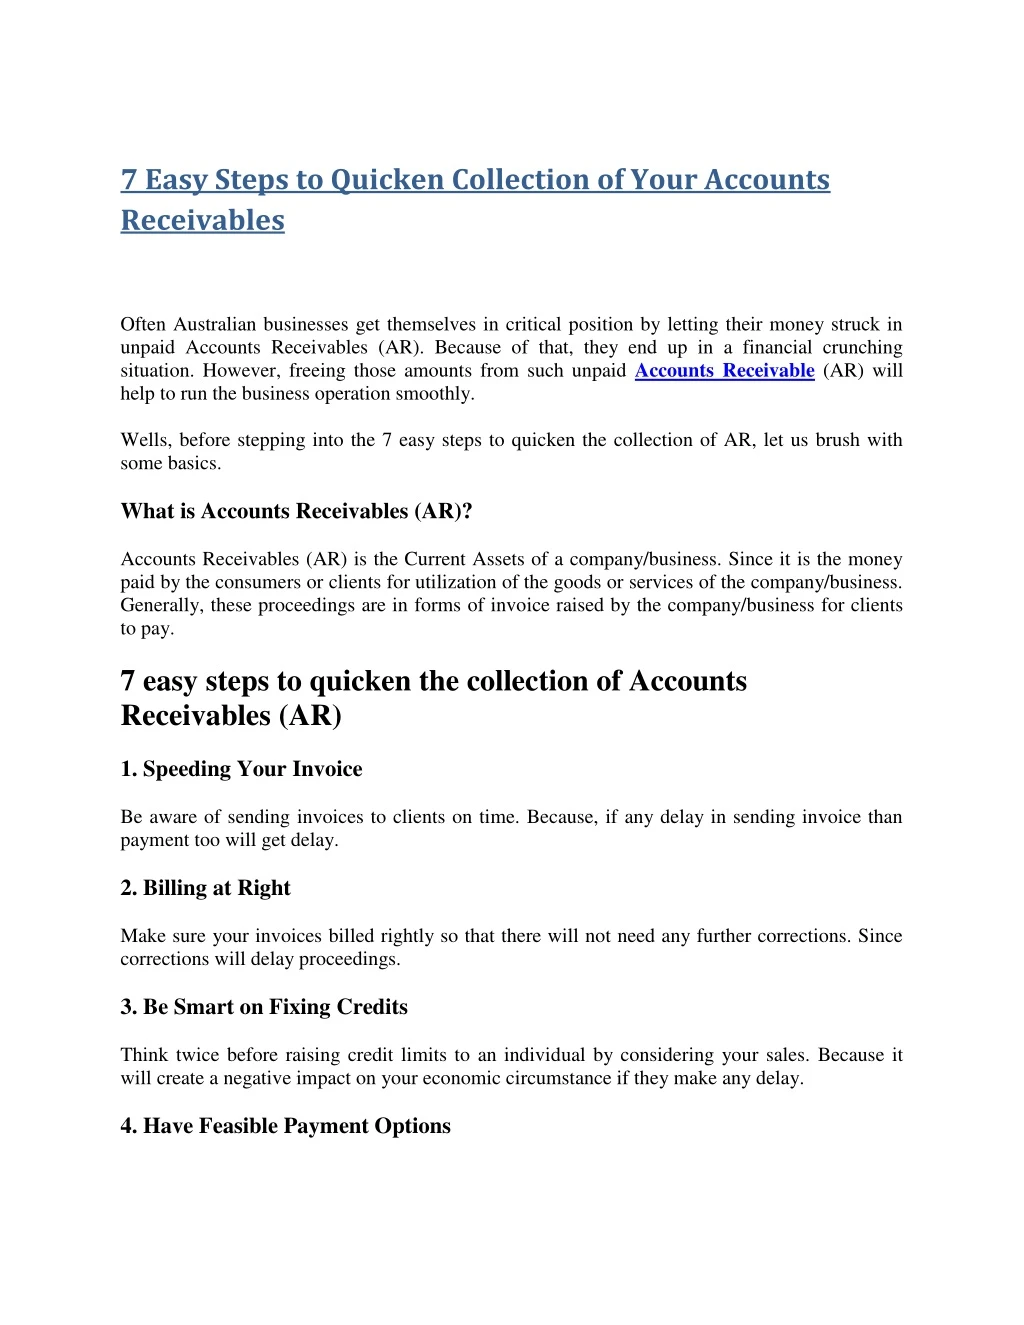 7 easy steps to quicken collection of your